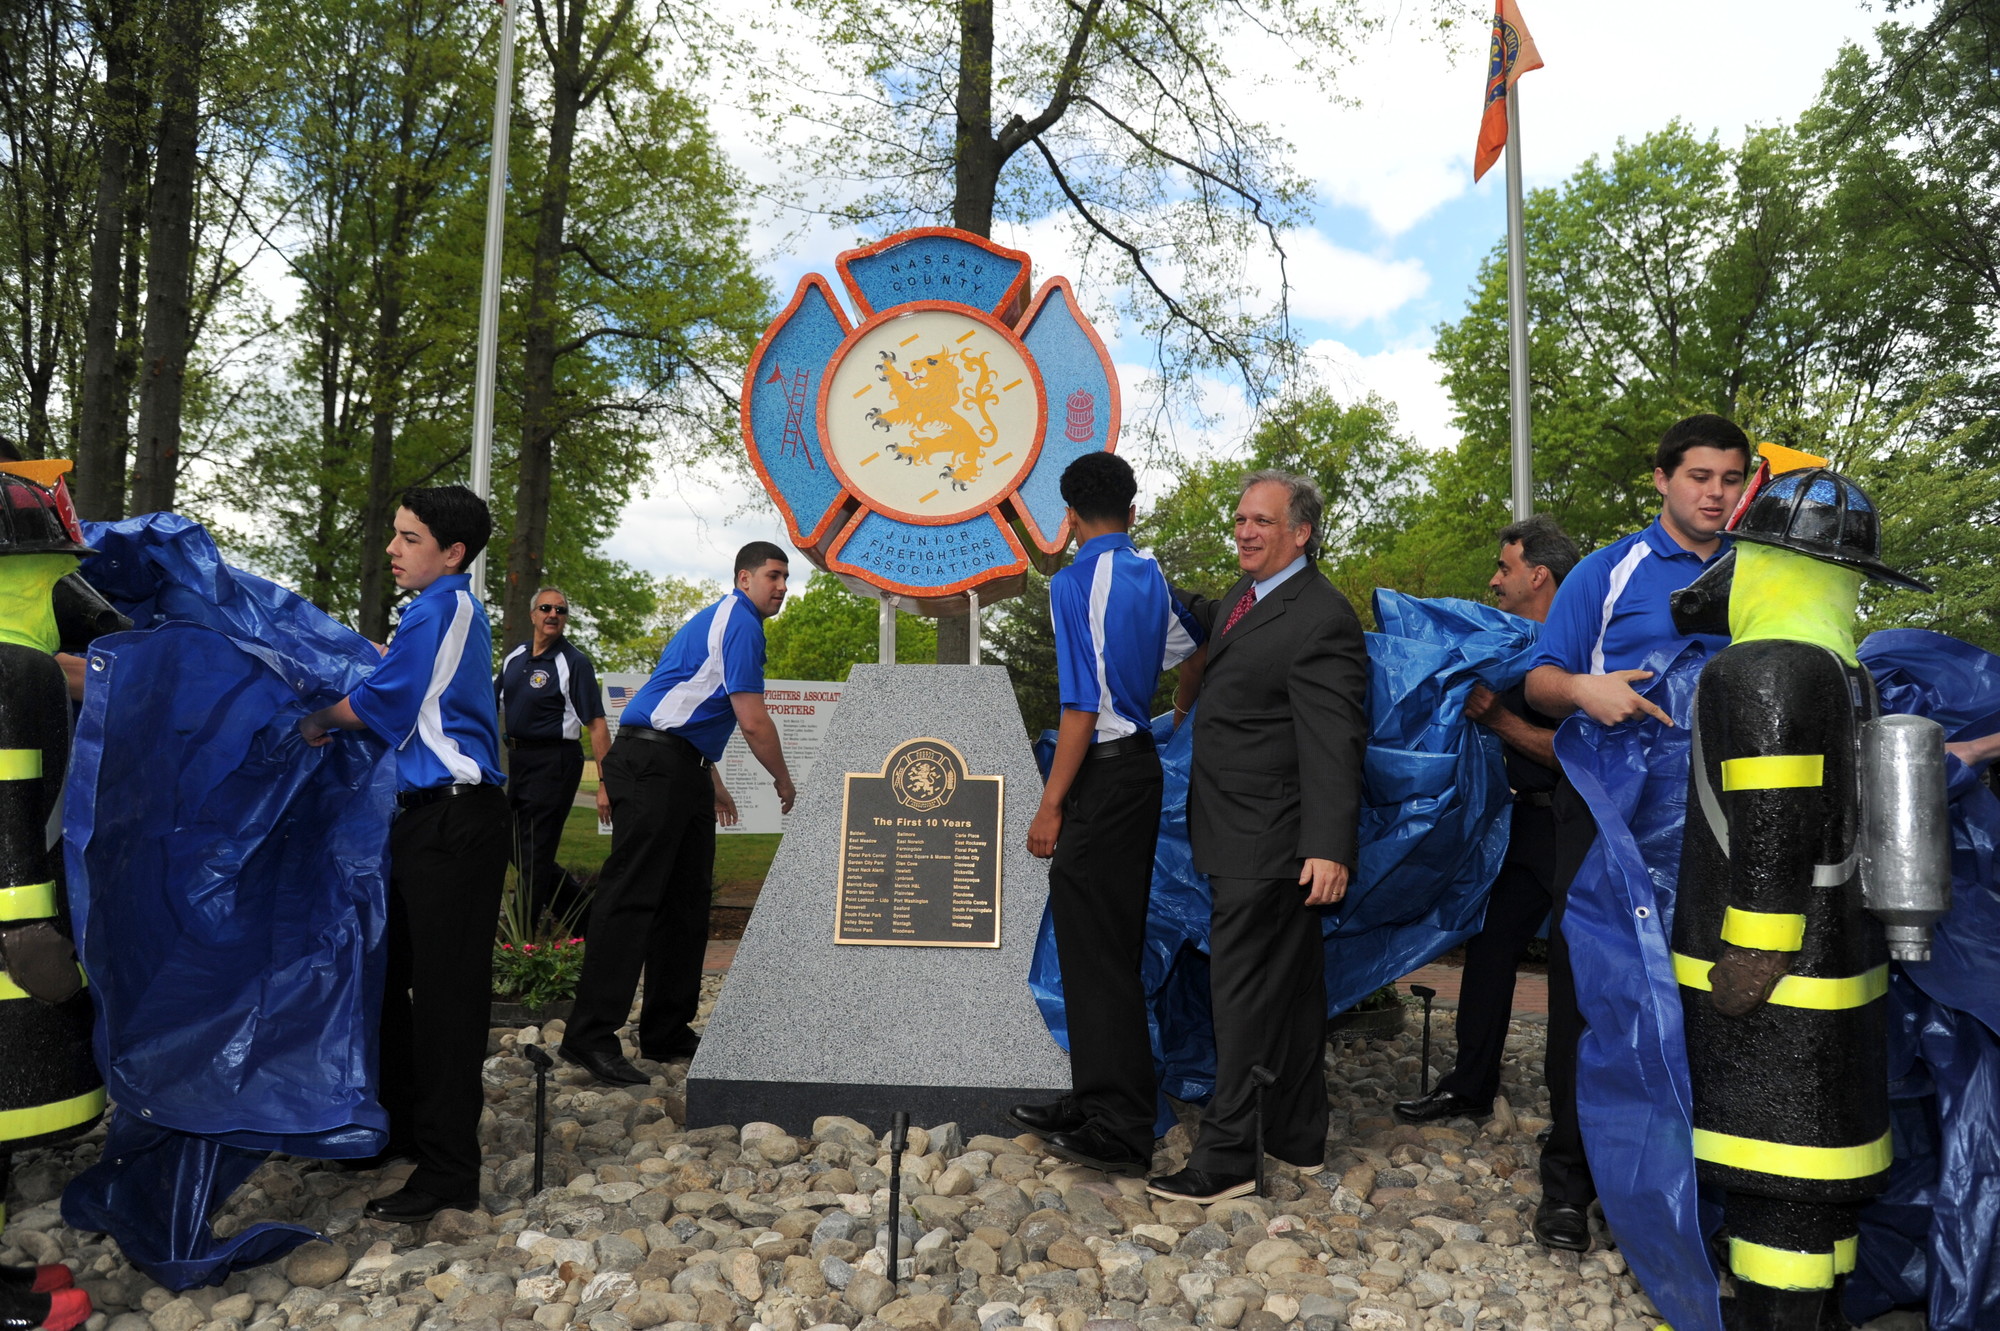 The Nassau County Junior Firefighters Association and lawmakers unveiled the new monument.